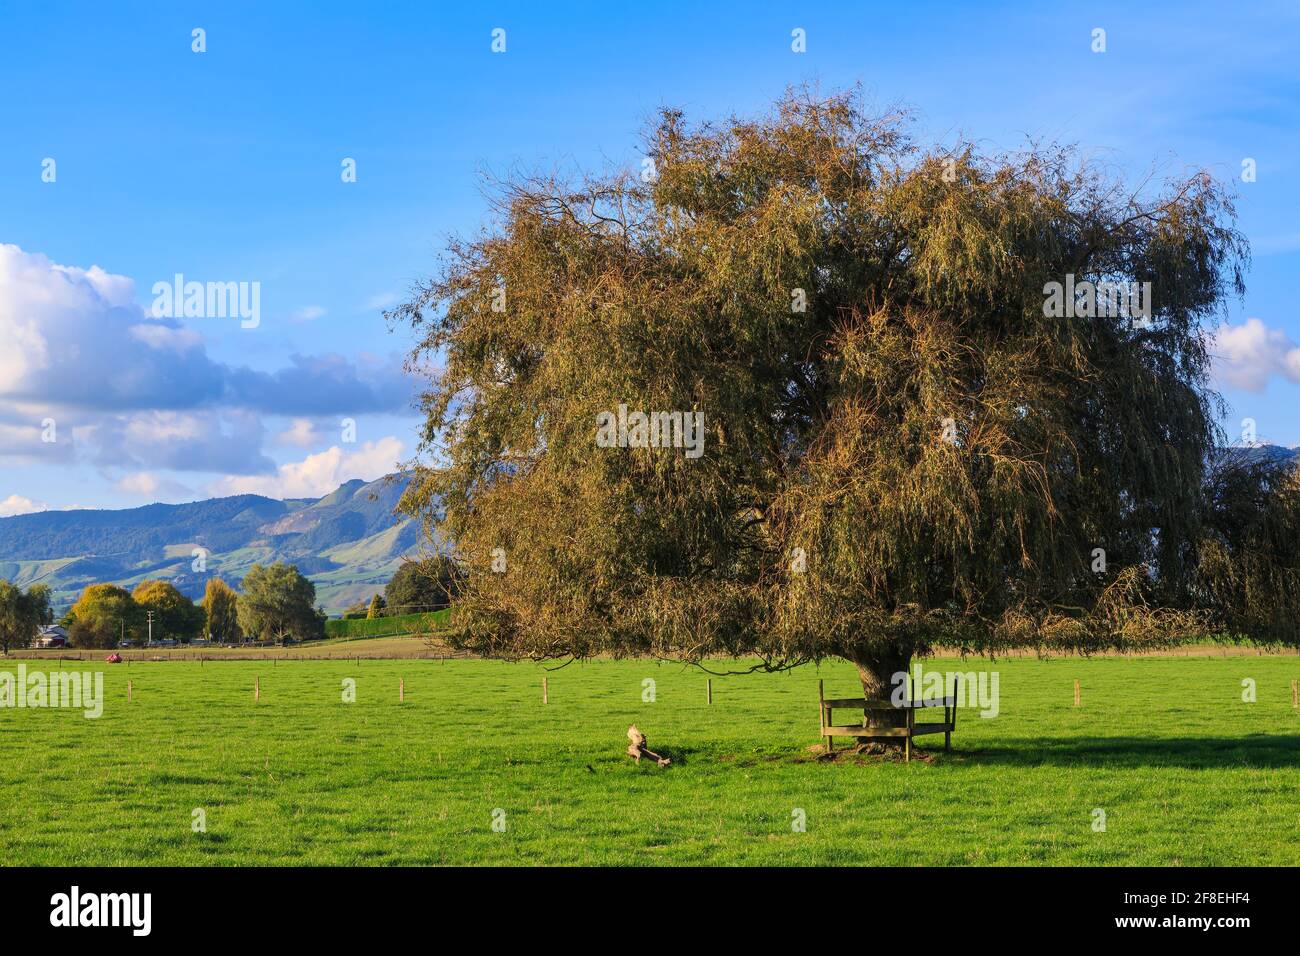 A weeping willow tree with autumn foliage growing on farmland in the Waikato Region, New Zealand Stock Photo